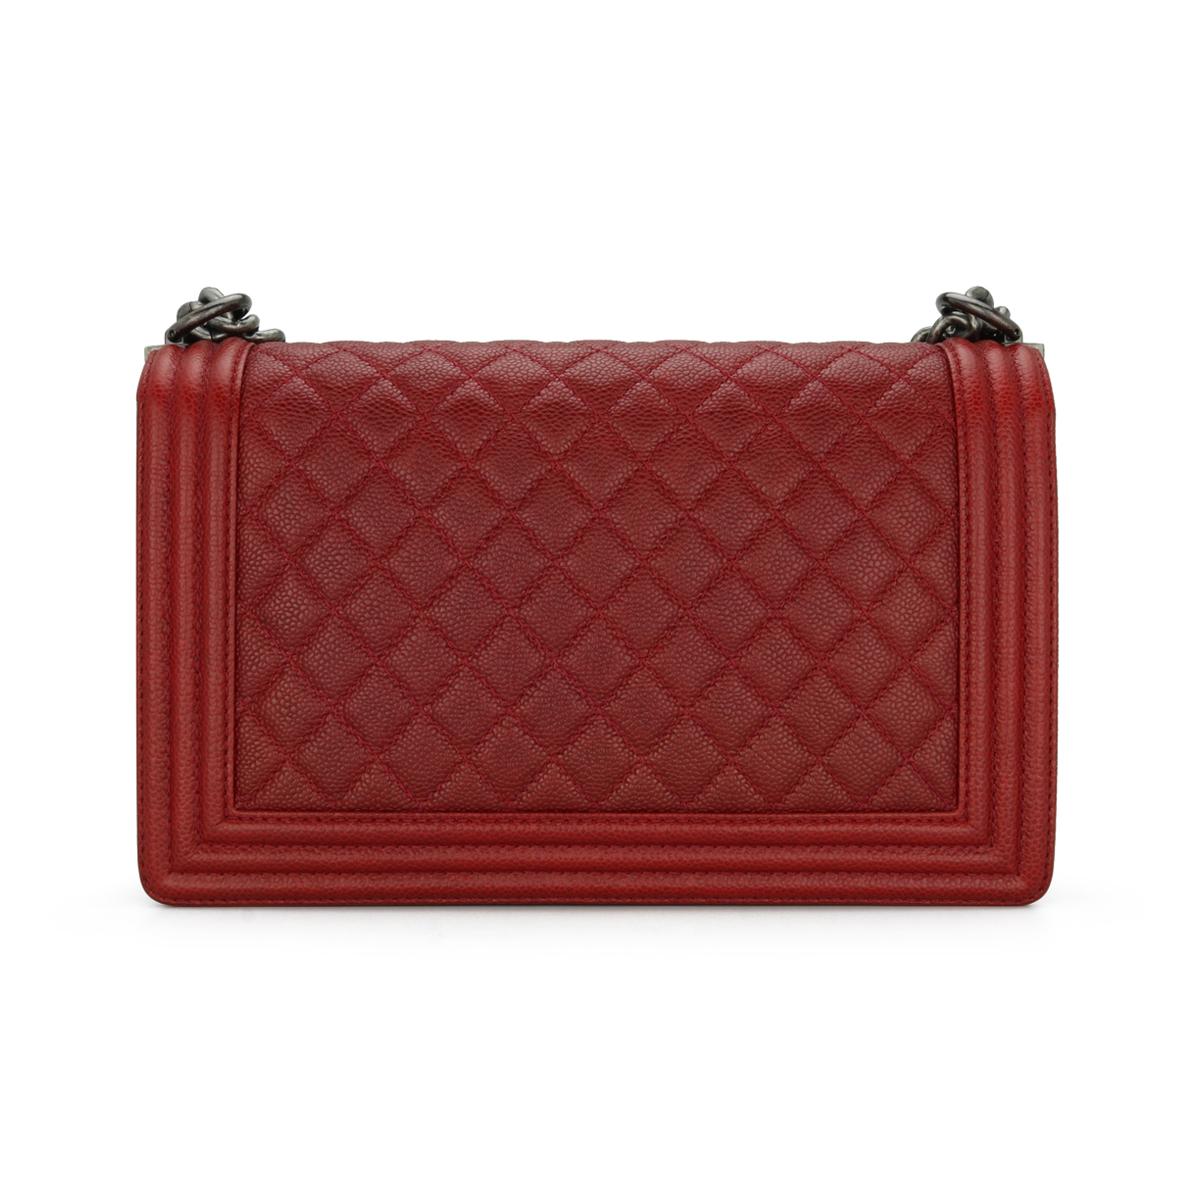 CHANEL New Medium Quilted Boy Bag in Dark Red Caviar with Ruthenium Hardware 14B In Good Condition For Sale In Huddersfield, GB